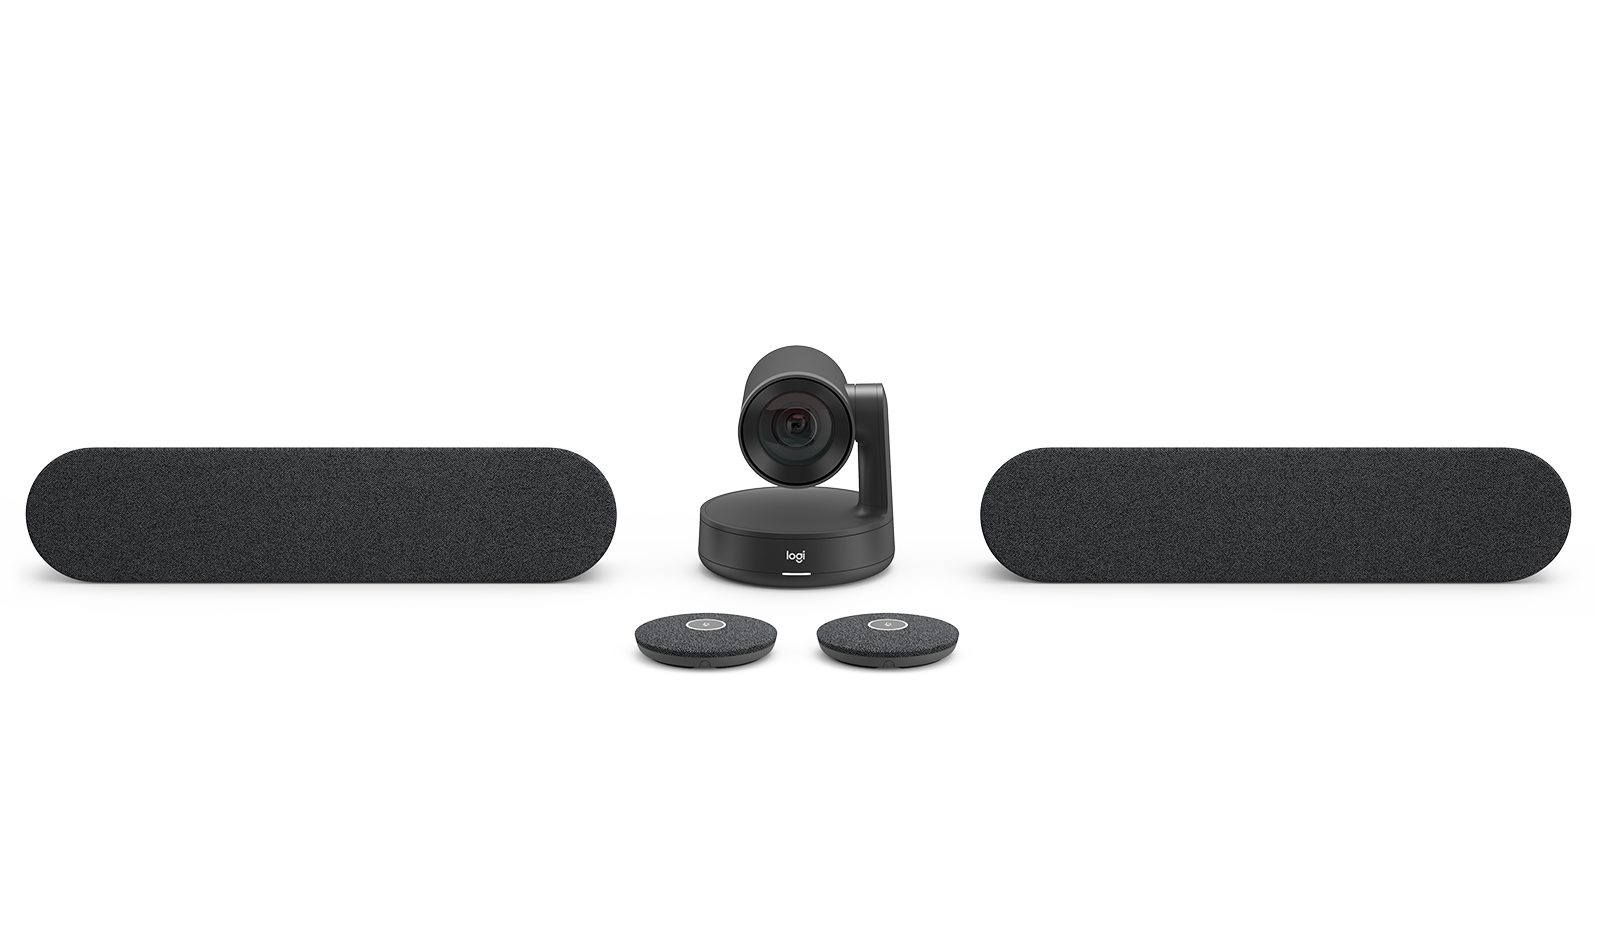 Logitech Rally Ultra Hd Ptz Conferencecam For Meeting Rooms